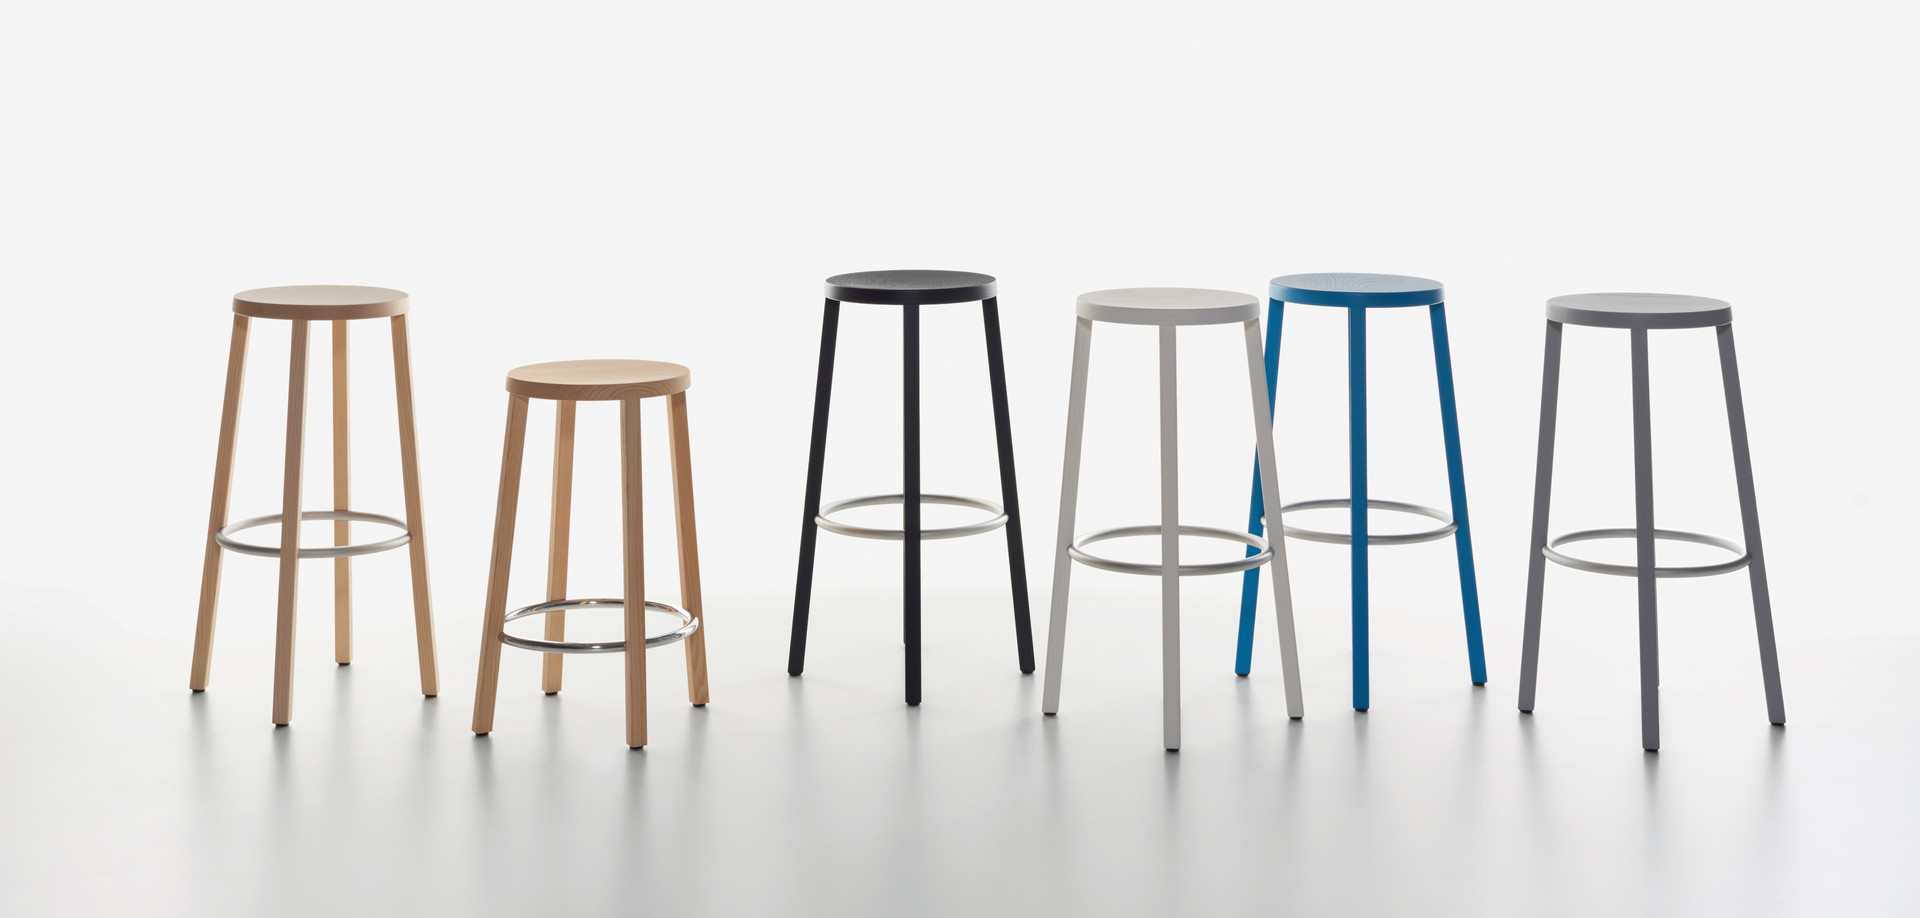 Plank - BLOCCO stool in the colors ash natural, black, grey, white and blue.